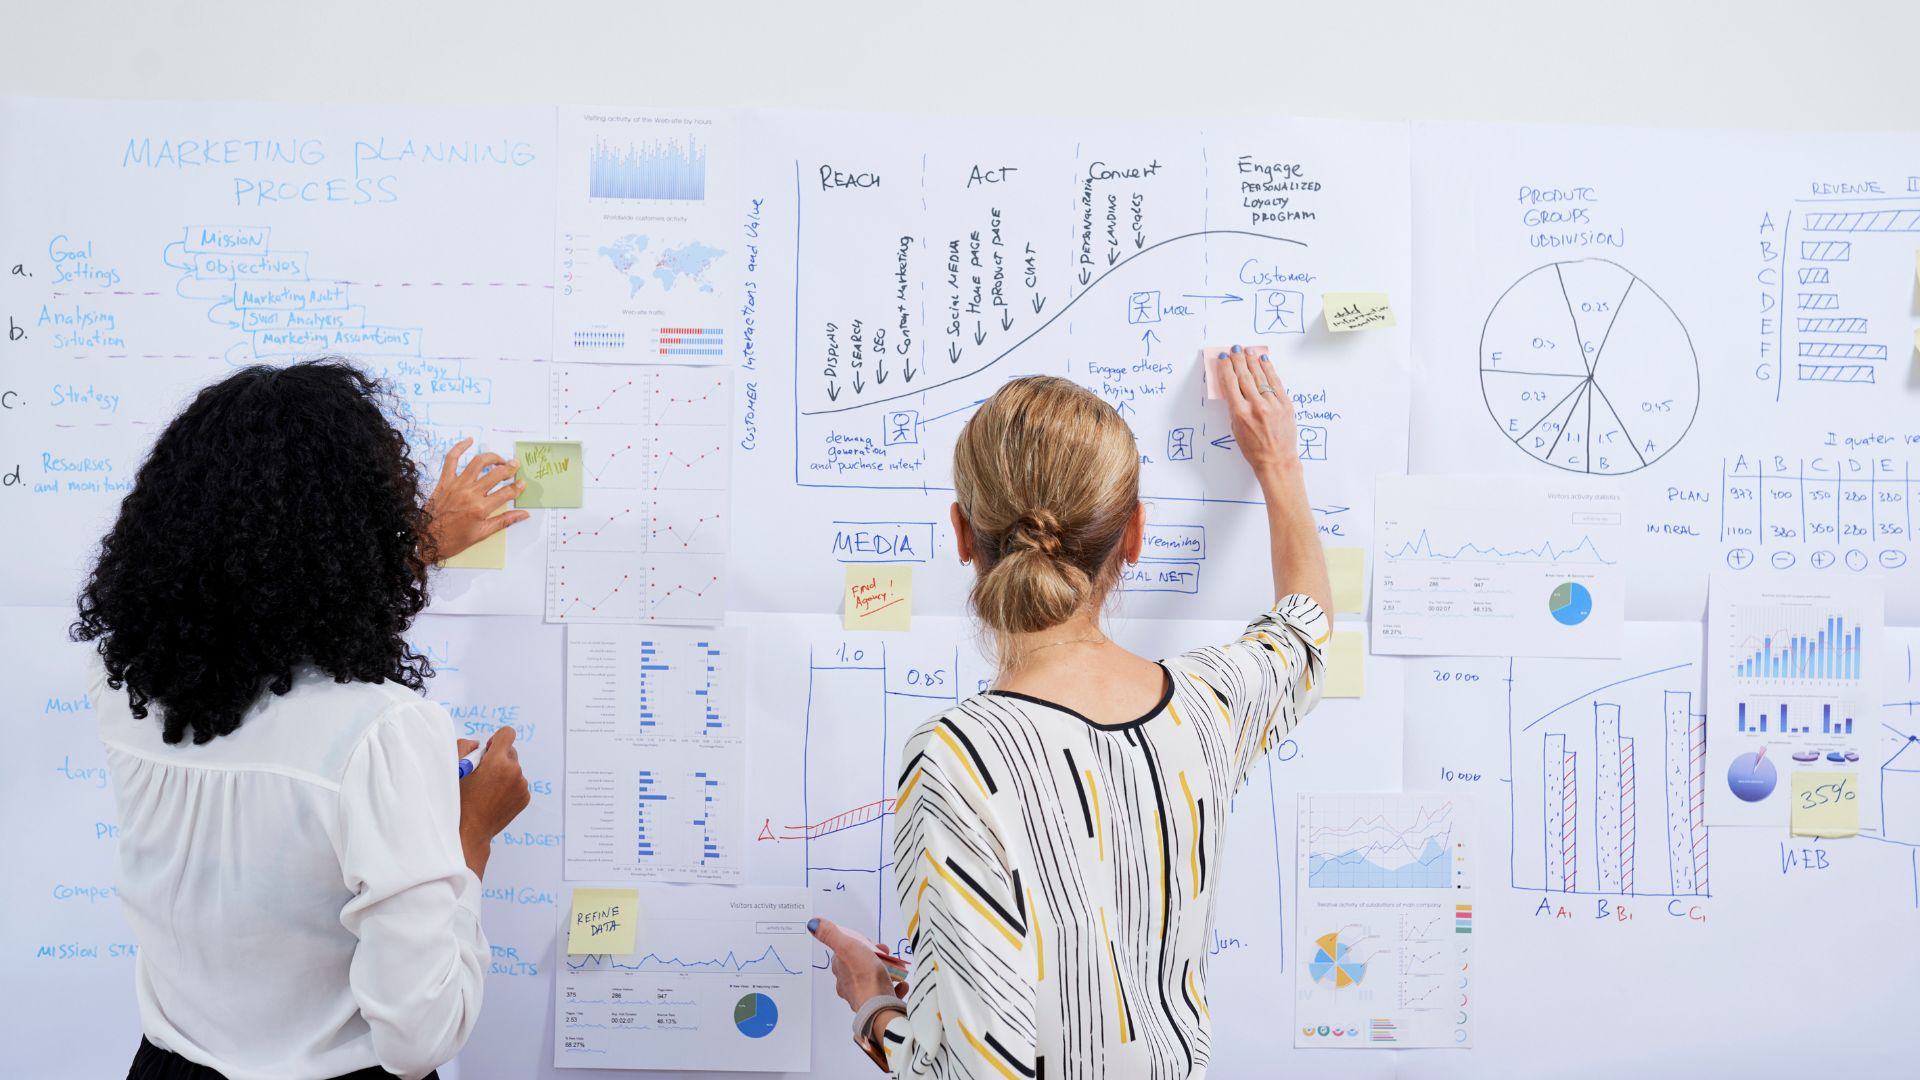 Two women standing in front of a whiteboard with diagrams on it.